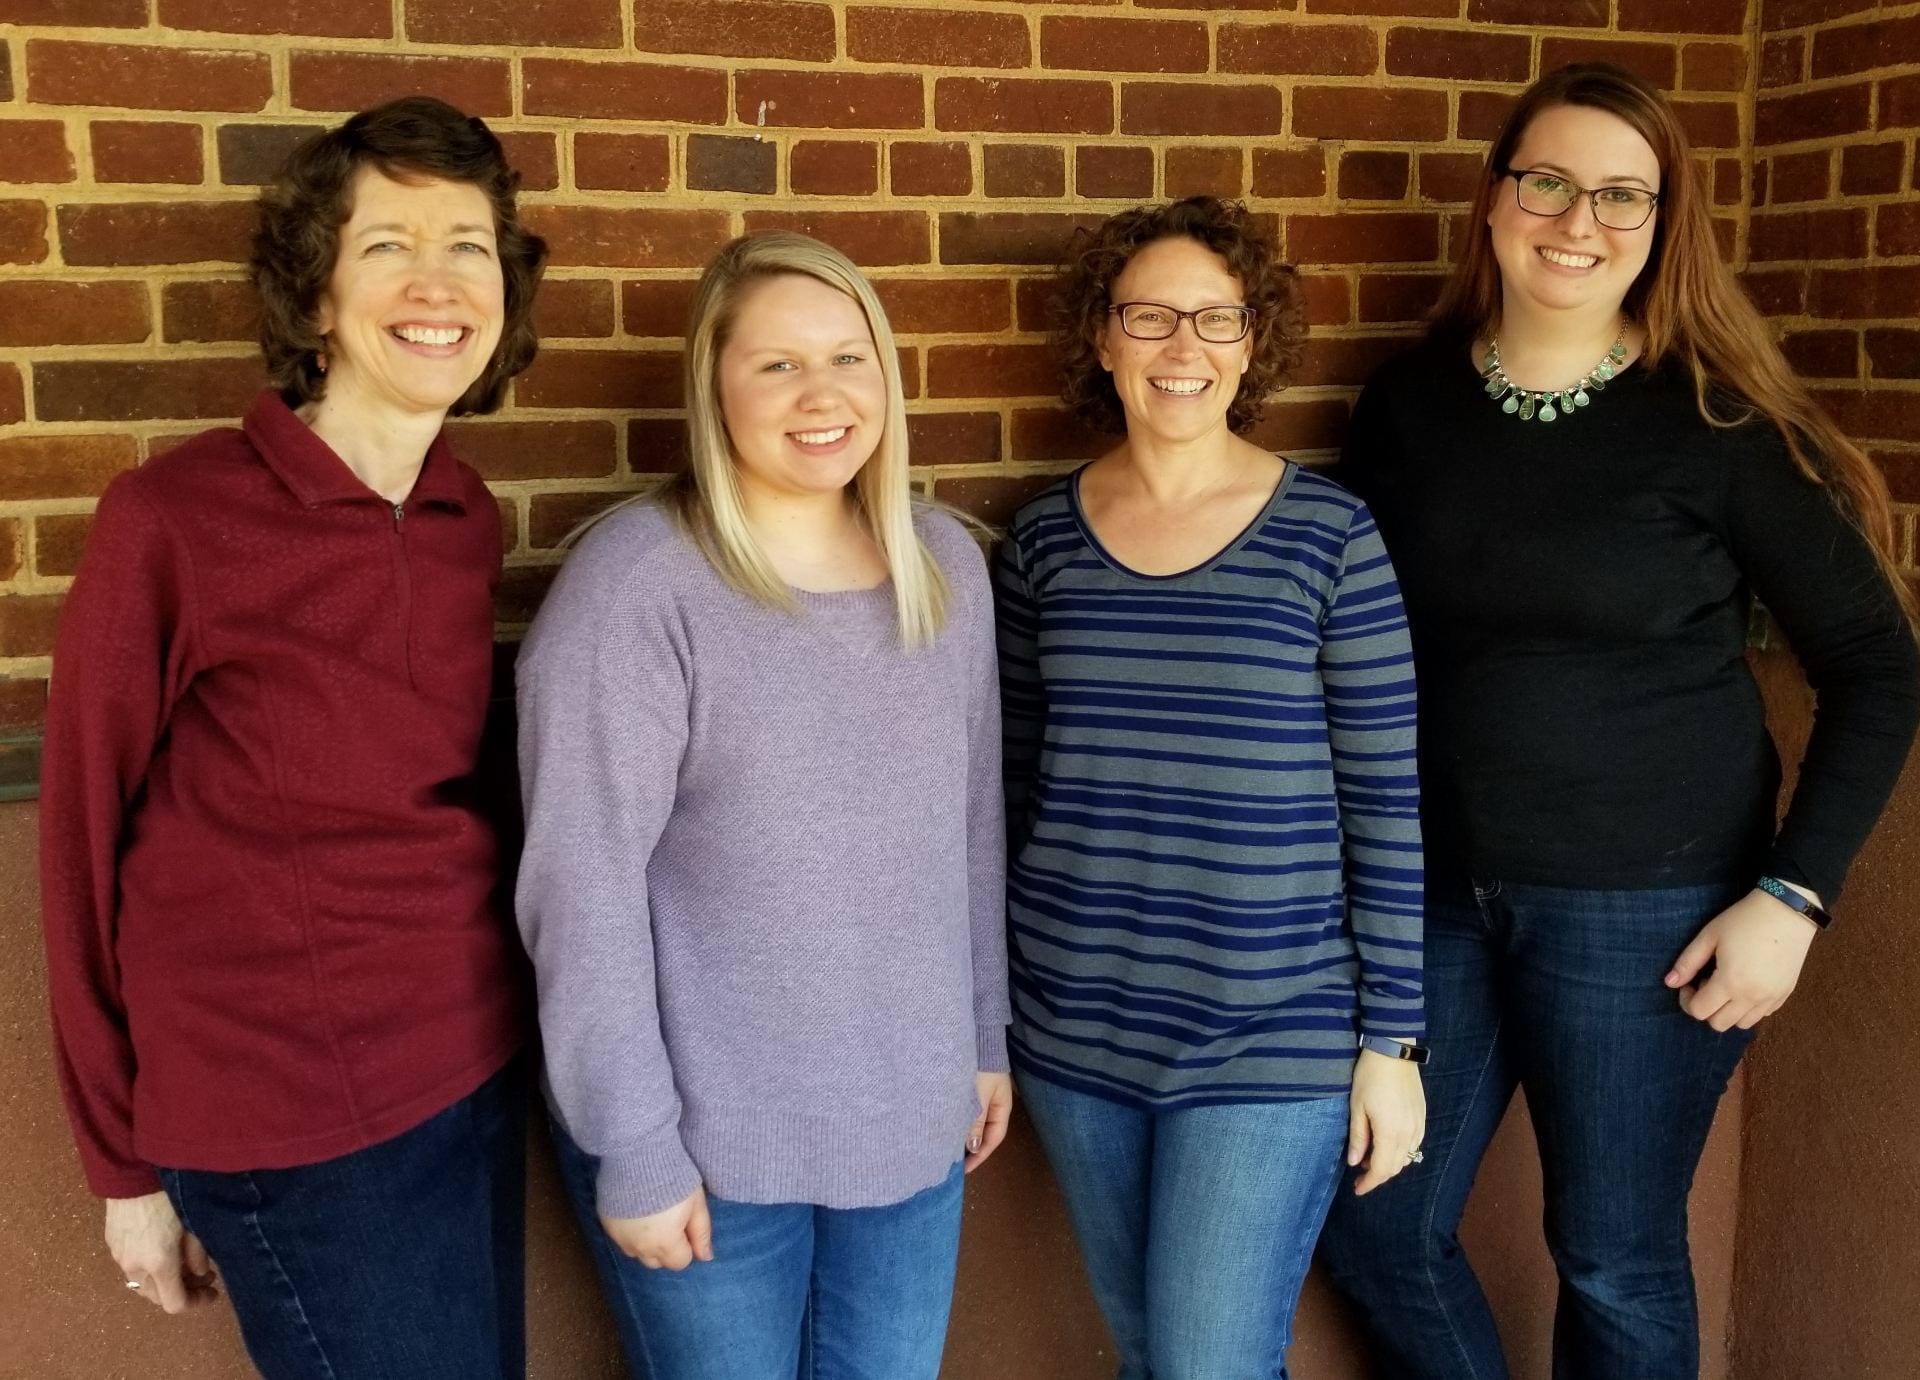 Pictured from left to right: graduate students Z. Qin, K. Clark, M. Savin; Dr. A. Shober; graduate student A. Soroka; and research associate M. Pautler. Not pictured: Dr. T. Sims, graduate student S. Riggi, and research technician S. Tingle.